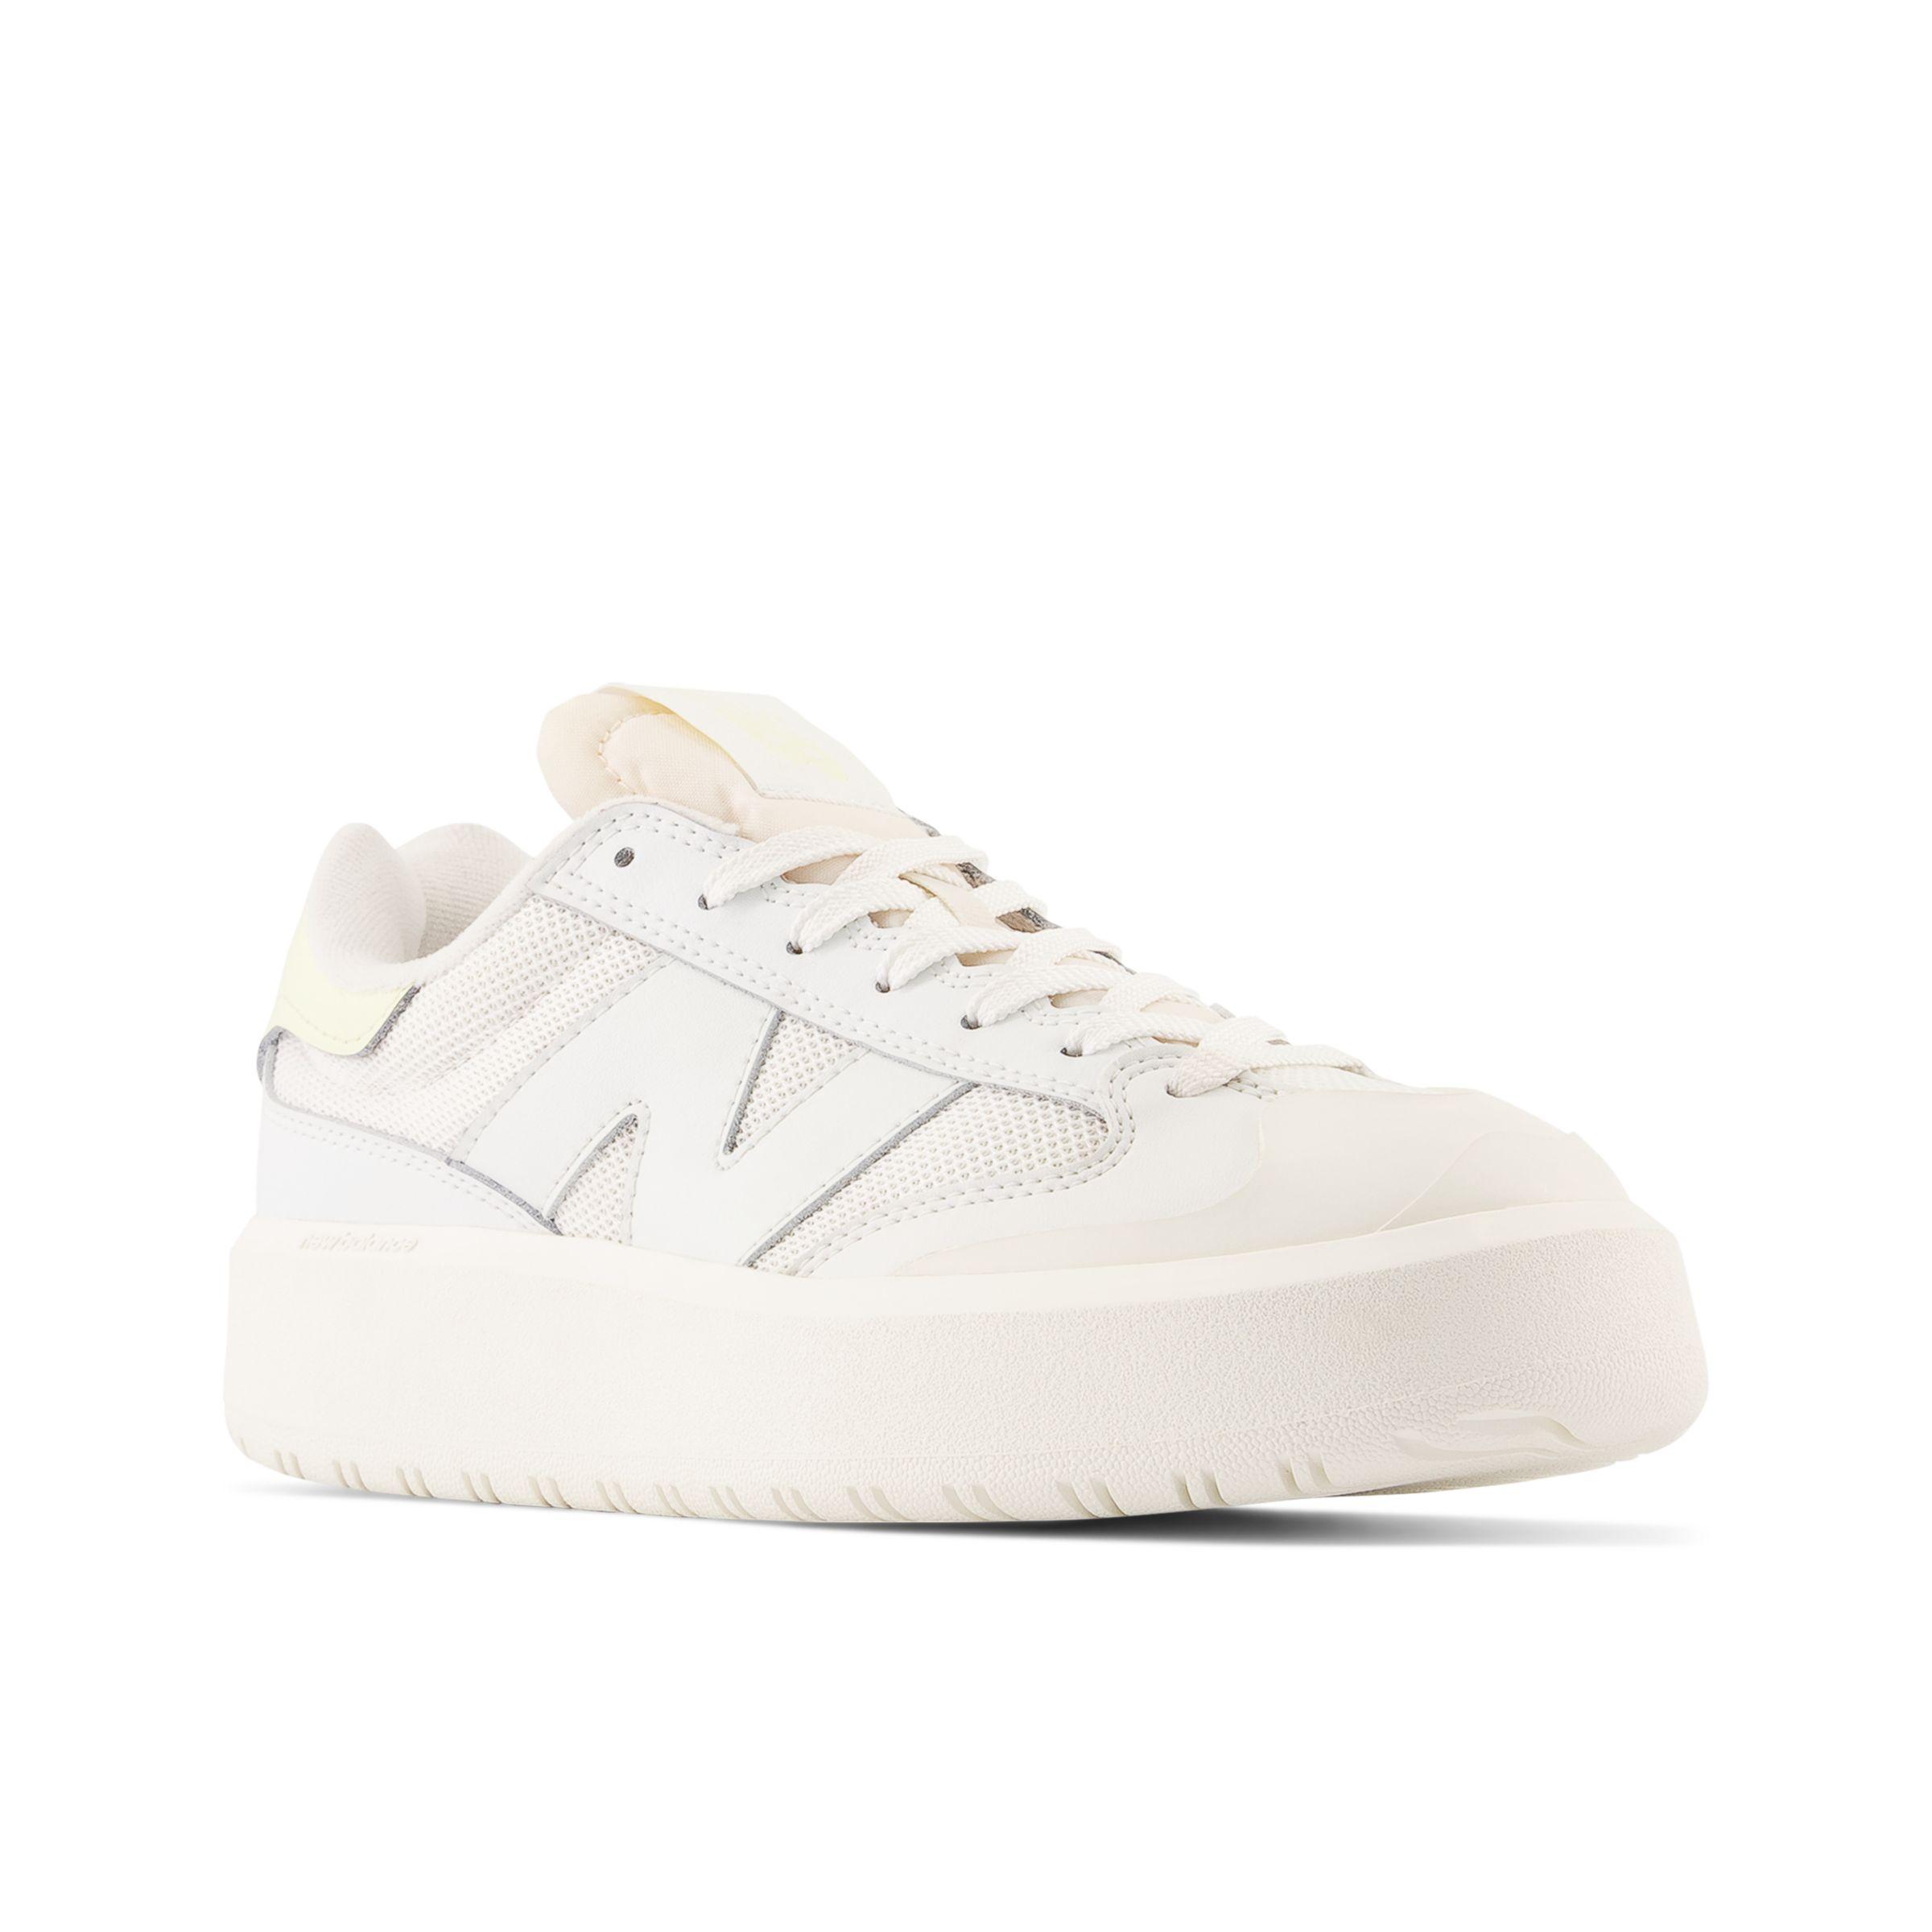 New Balance Ct302 In White/yellow Suede/mesh | Lyst UK